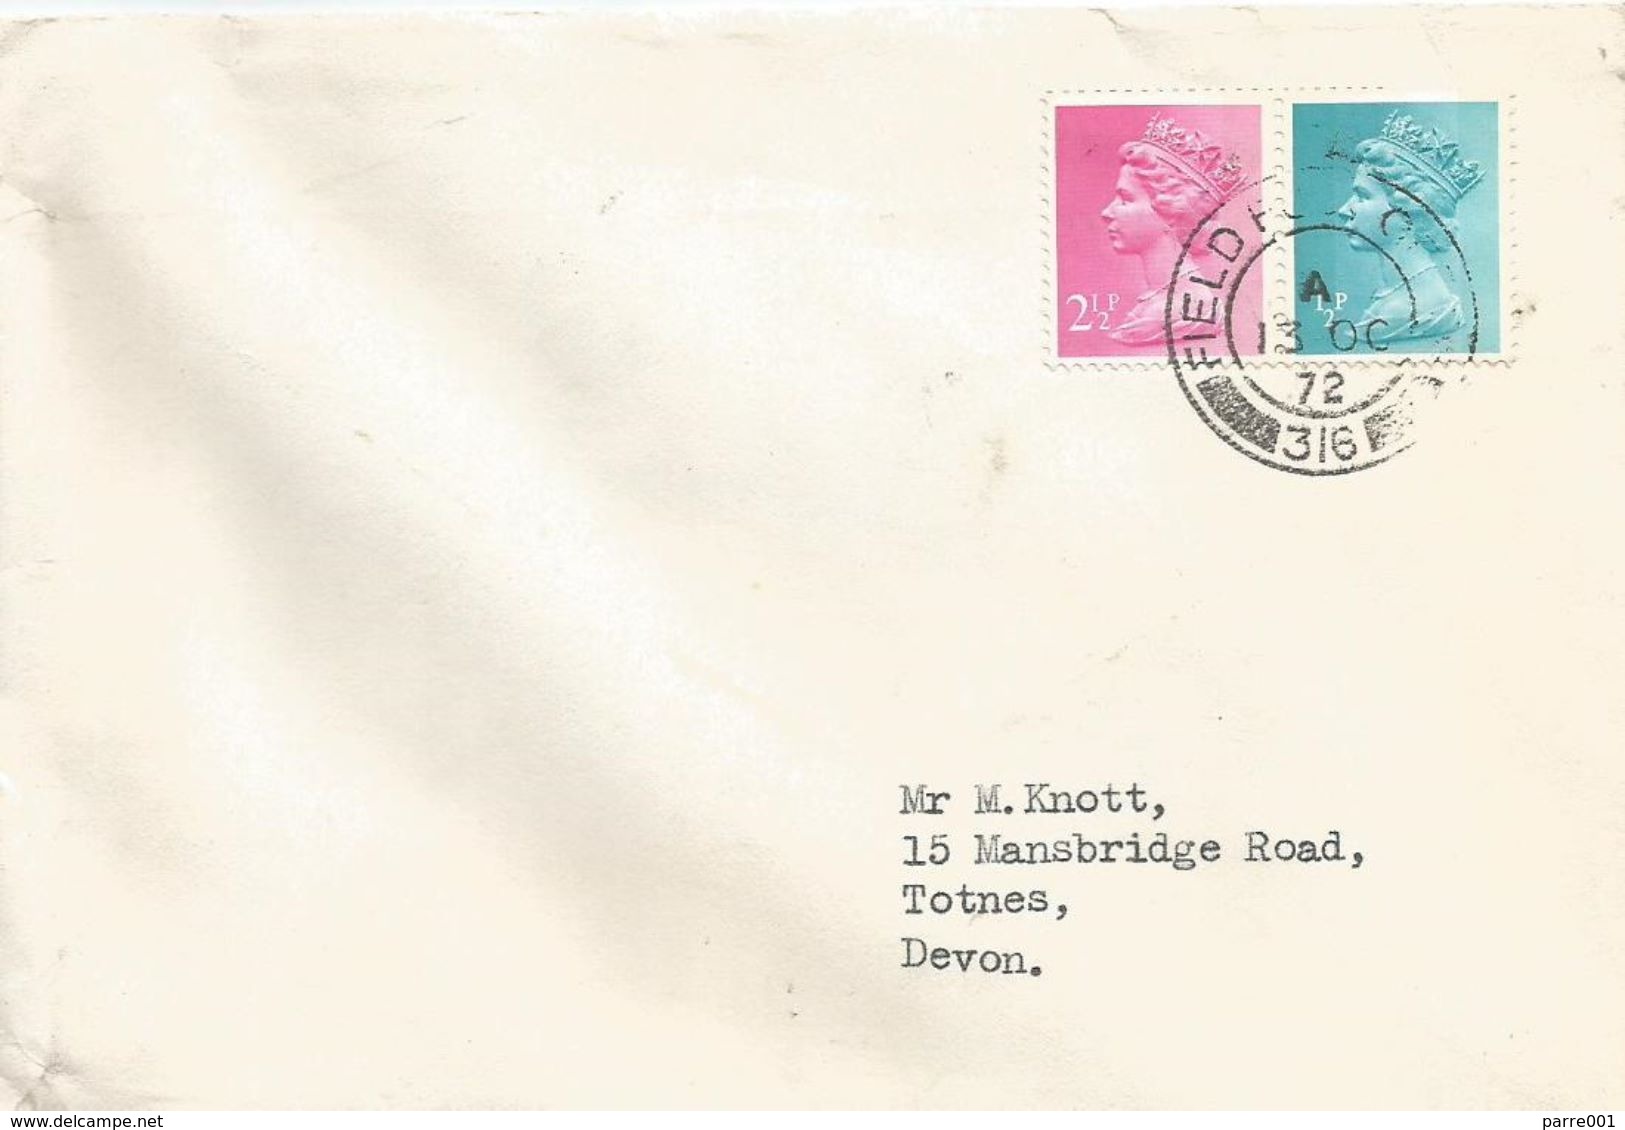 Northern Ireland 1972 FPO 316 Queens Royal Lancers Lisanelly Barracks IRA Campaign Forces Mail Cover - Militaria